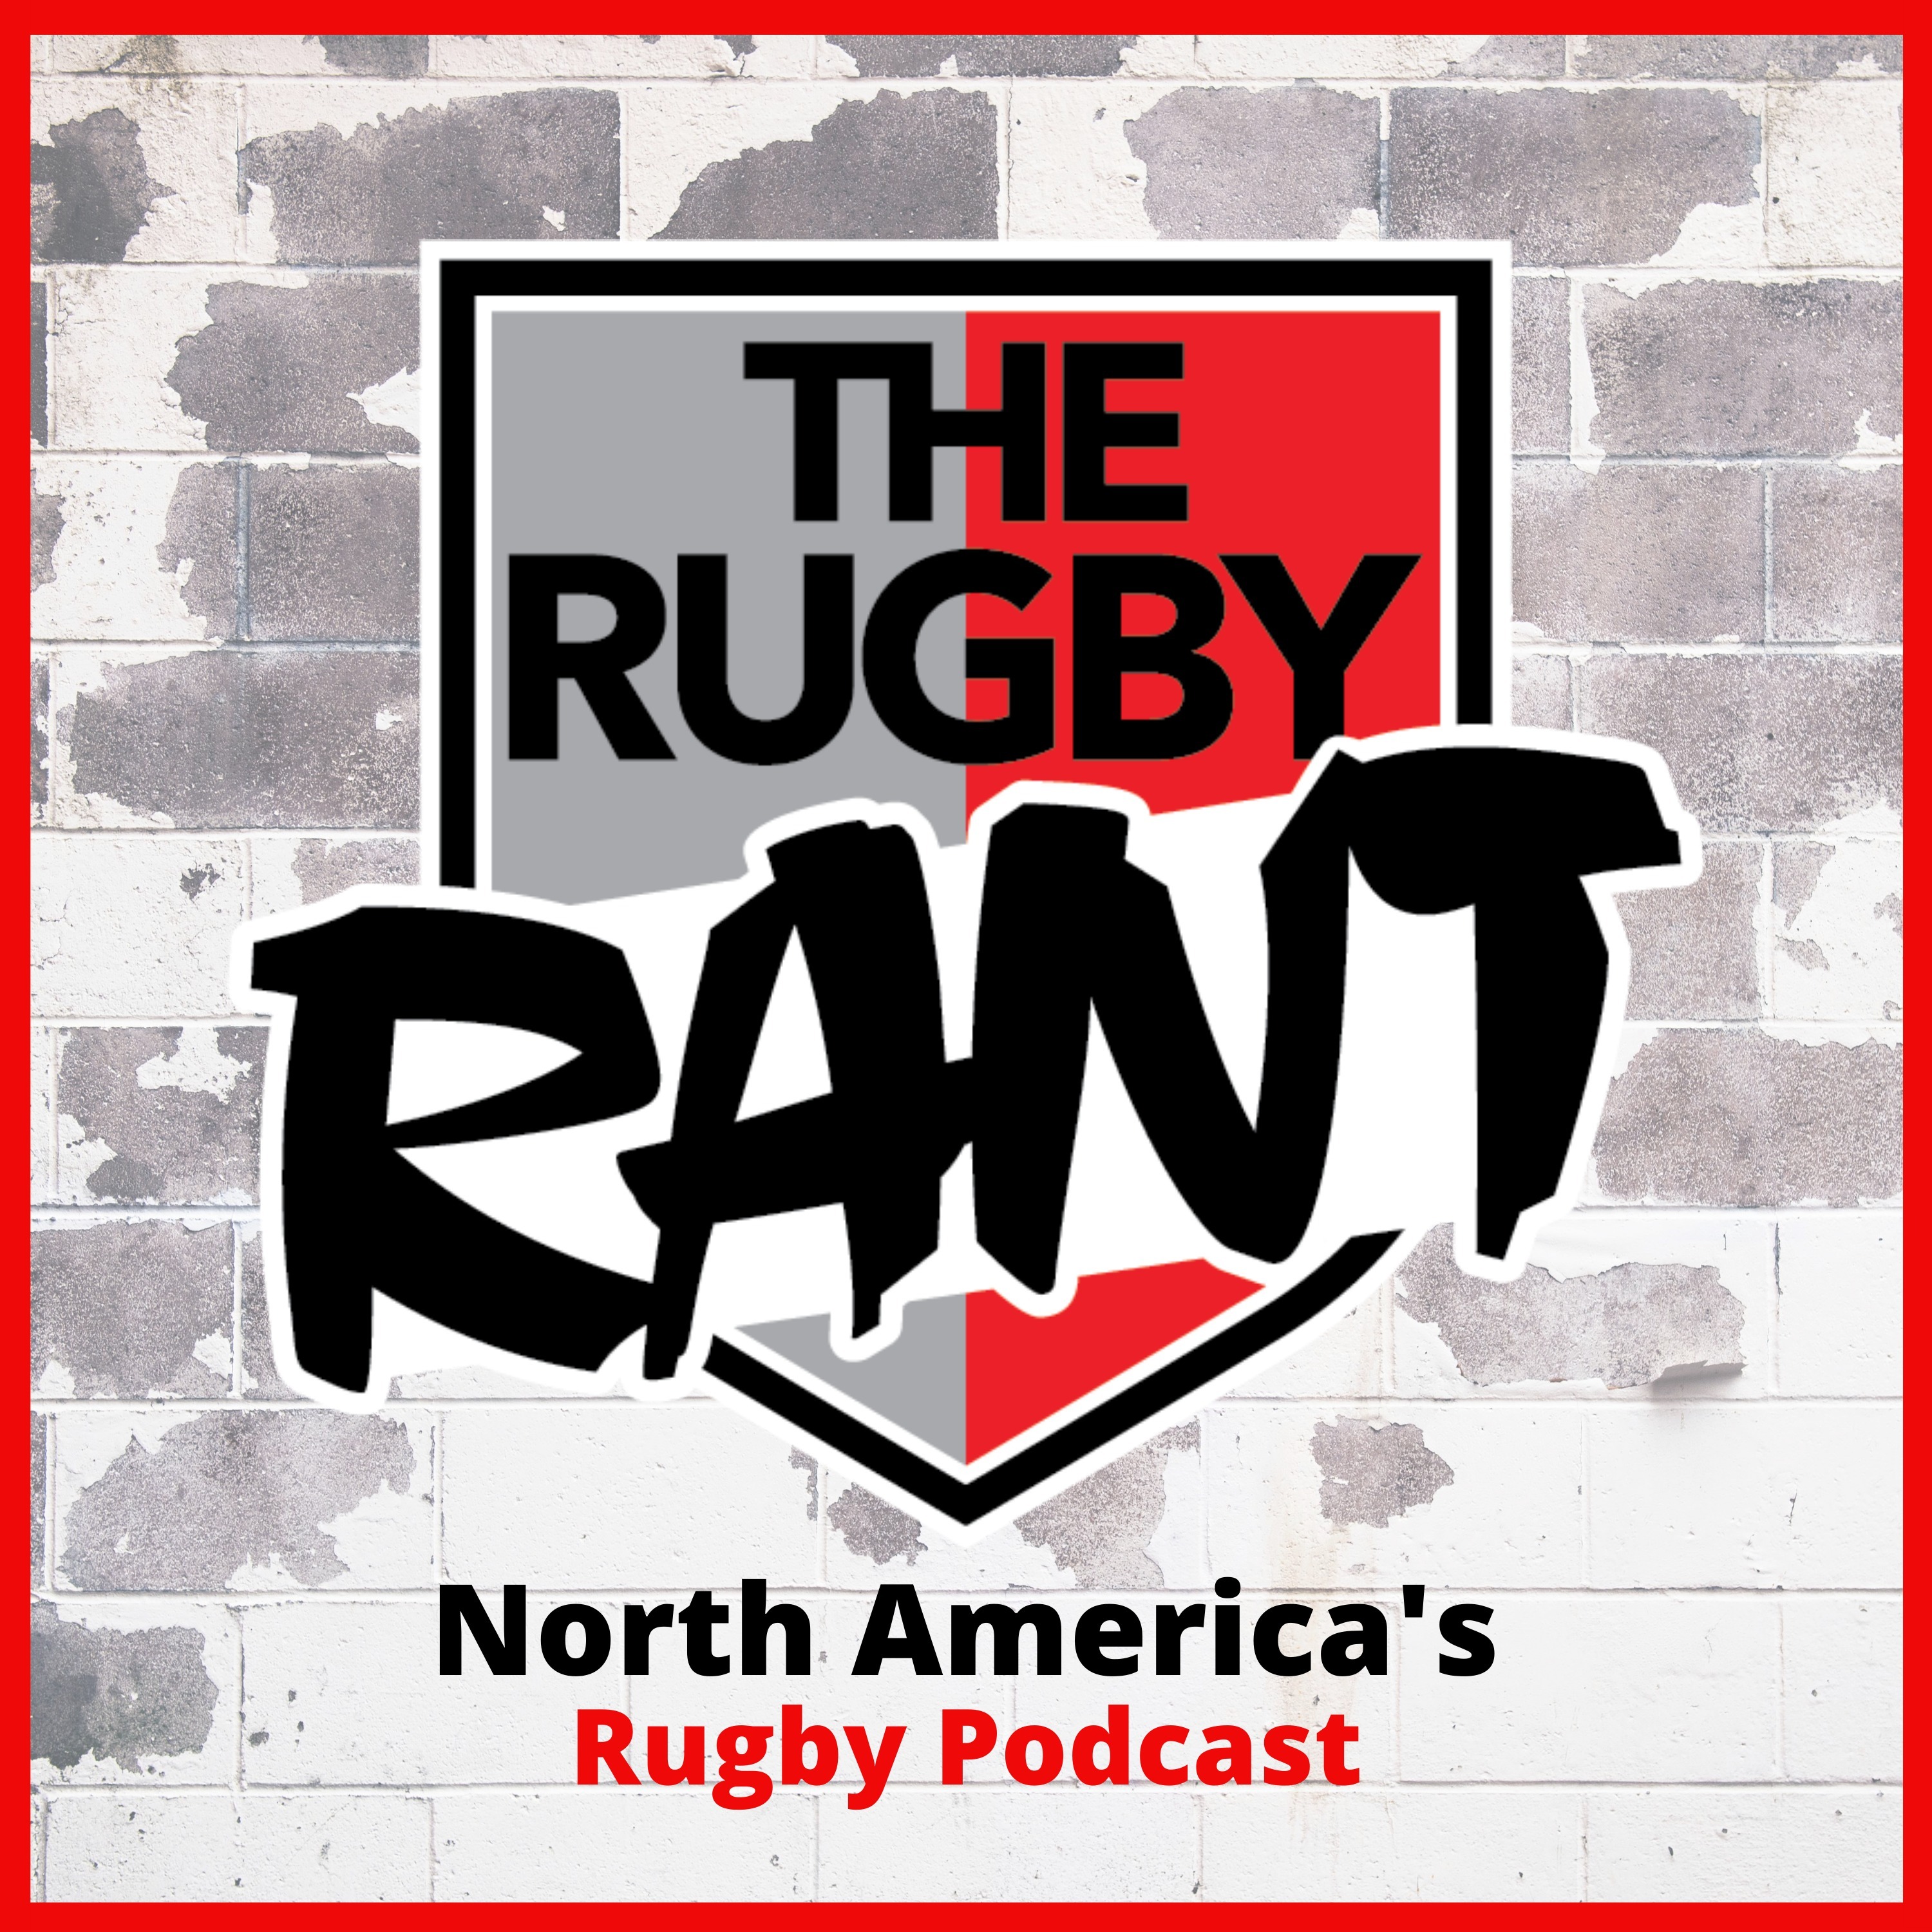 The Rugby Rant - Run, Pass or Kick with Josh Pray